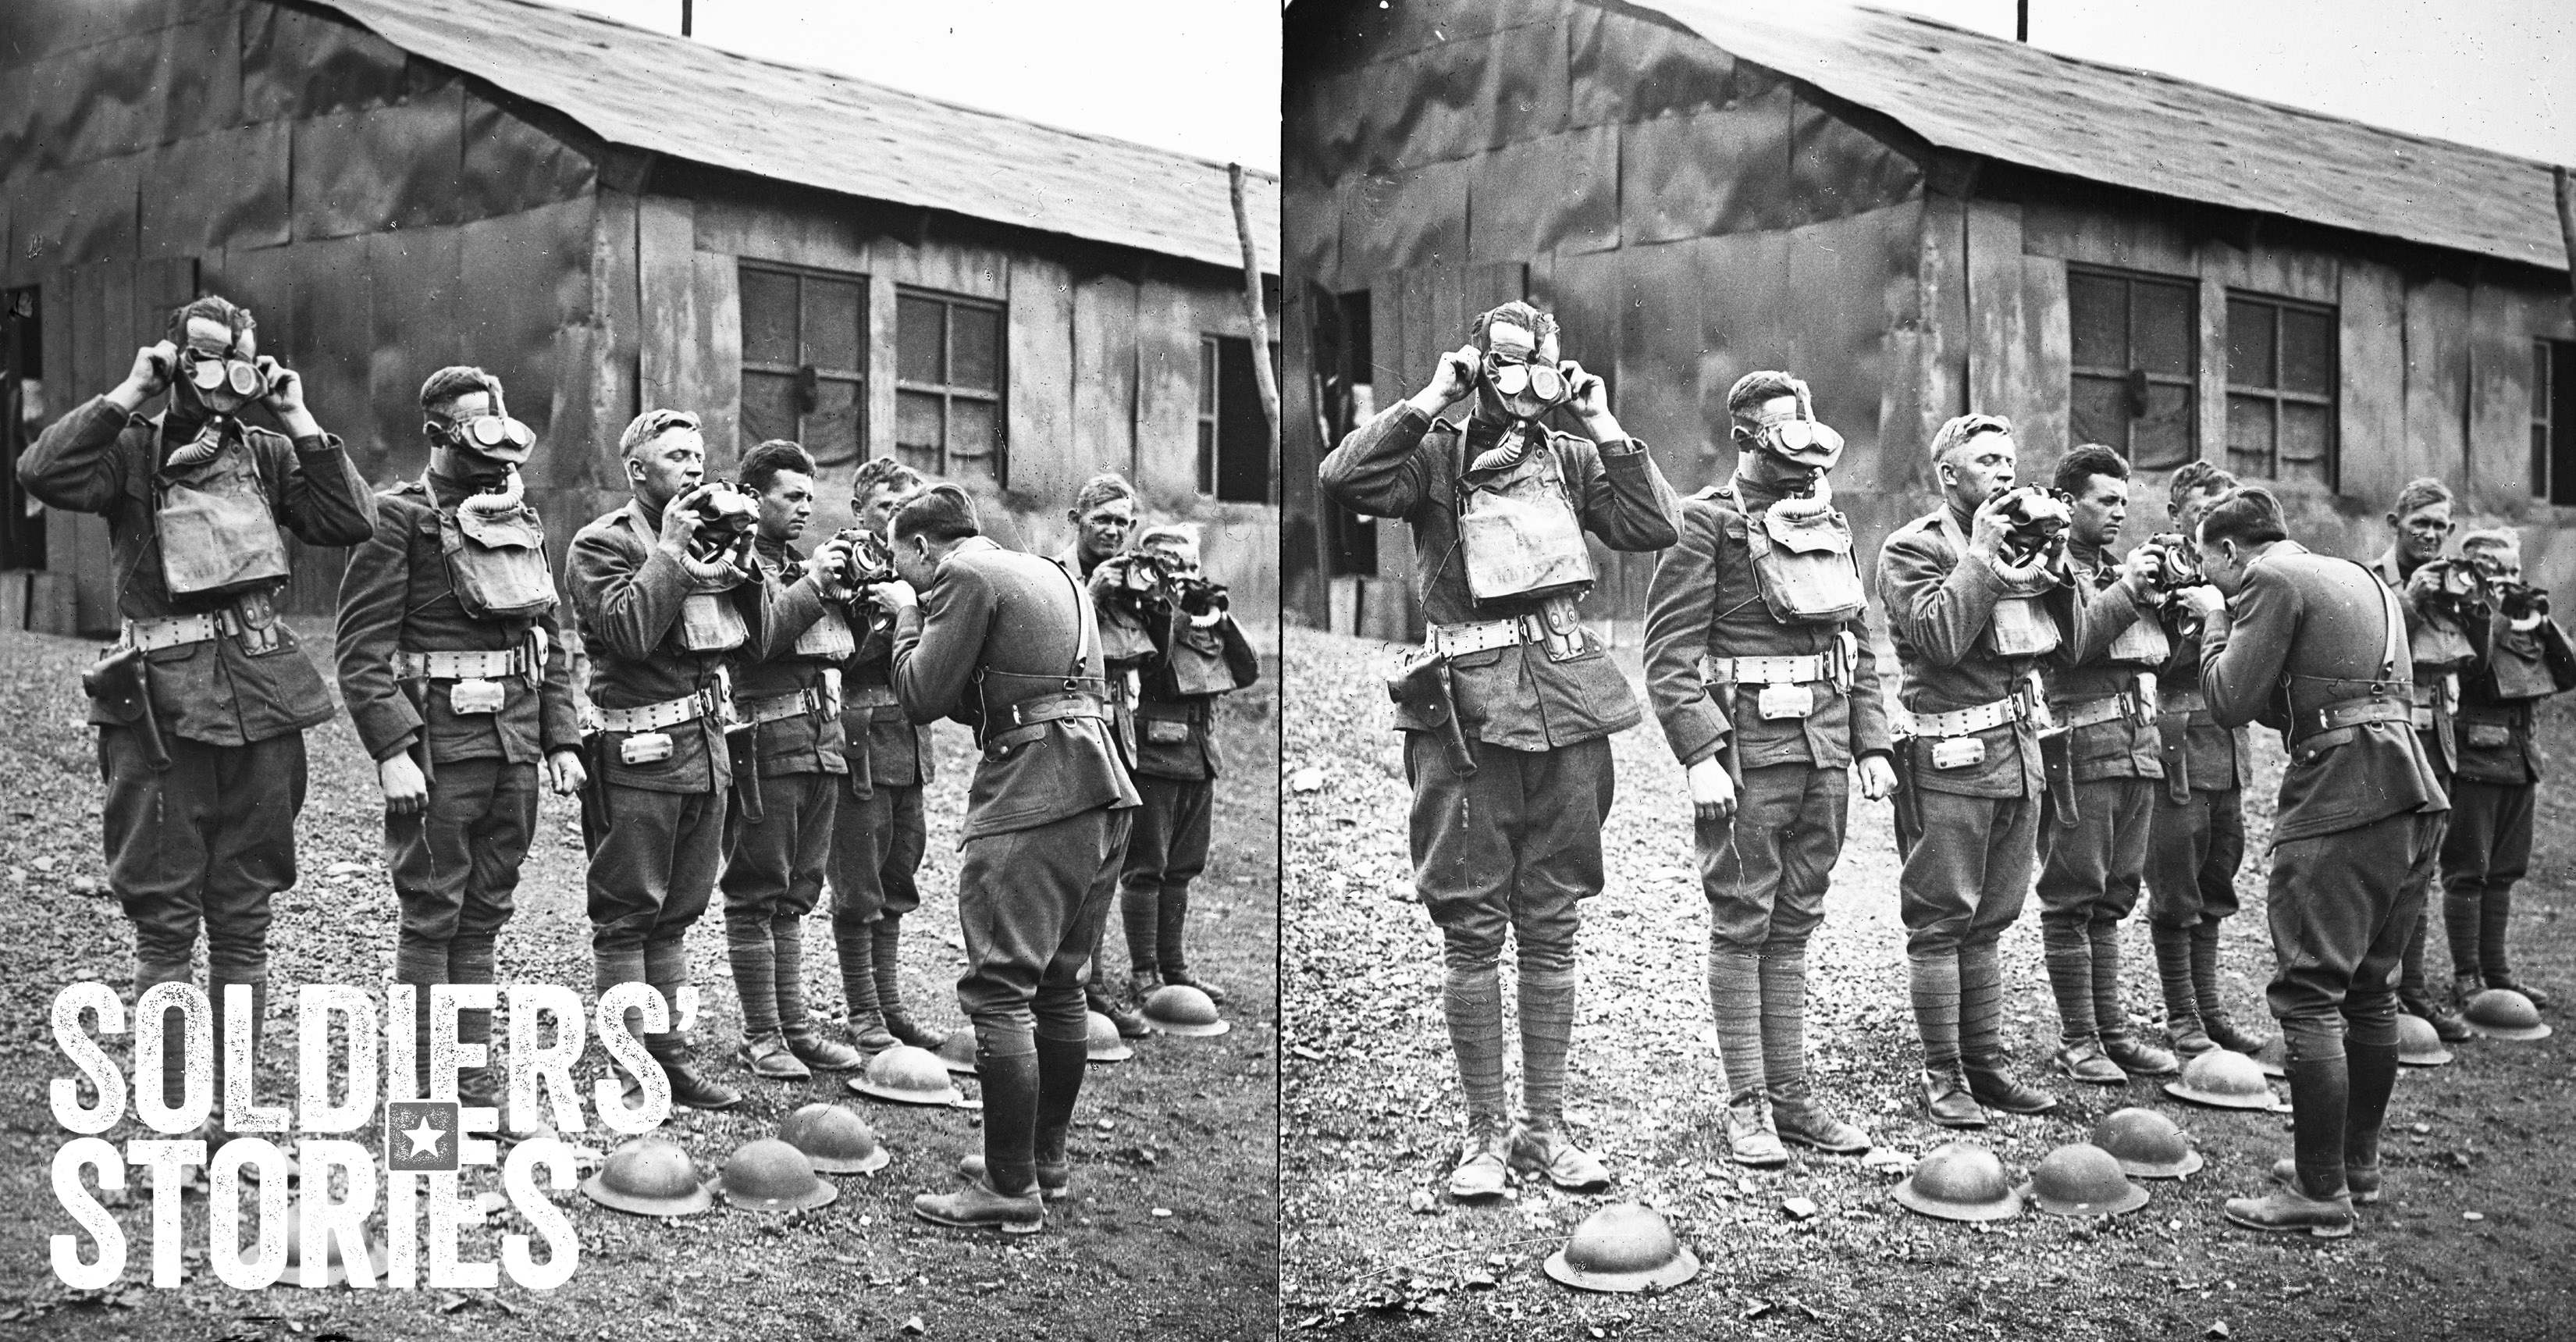 Original stereoscopic negative used in the film SOLDIERS STORIES distributed by Kallisti Media, directed by Jonathan Kitzen